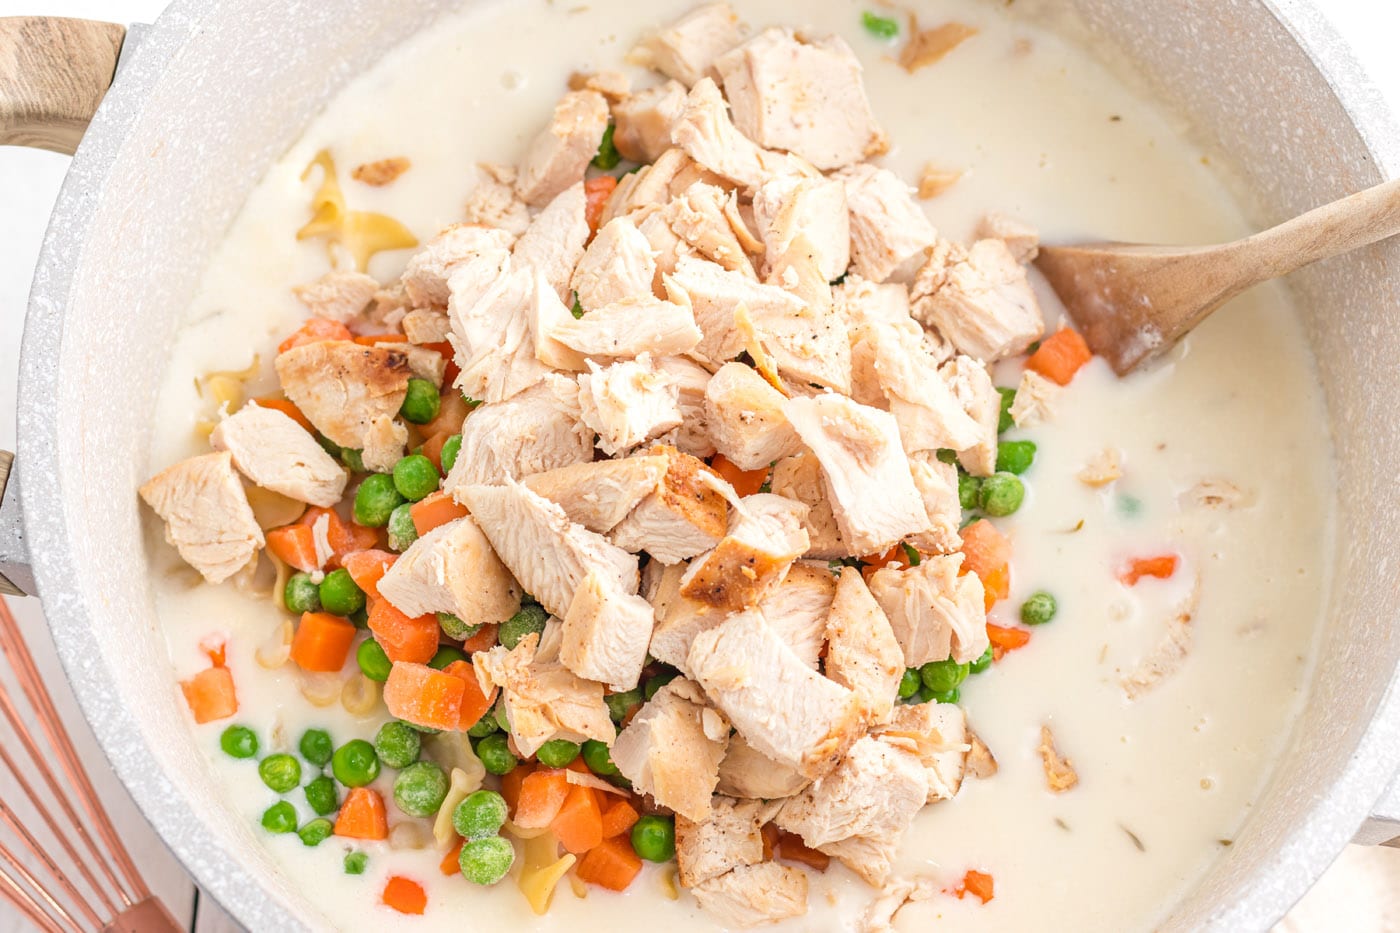 chicken, peas, and carrots in egg noodle mixture